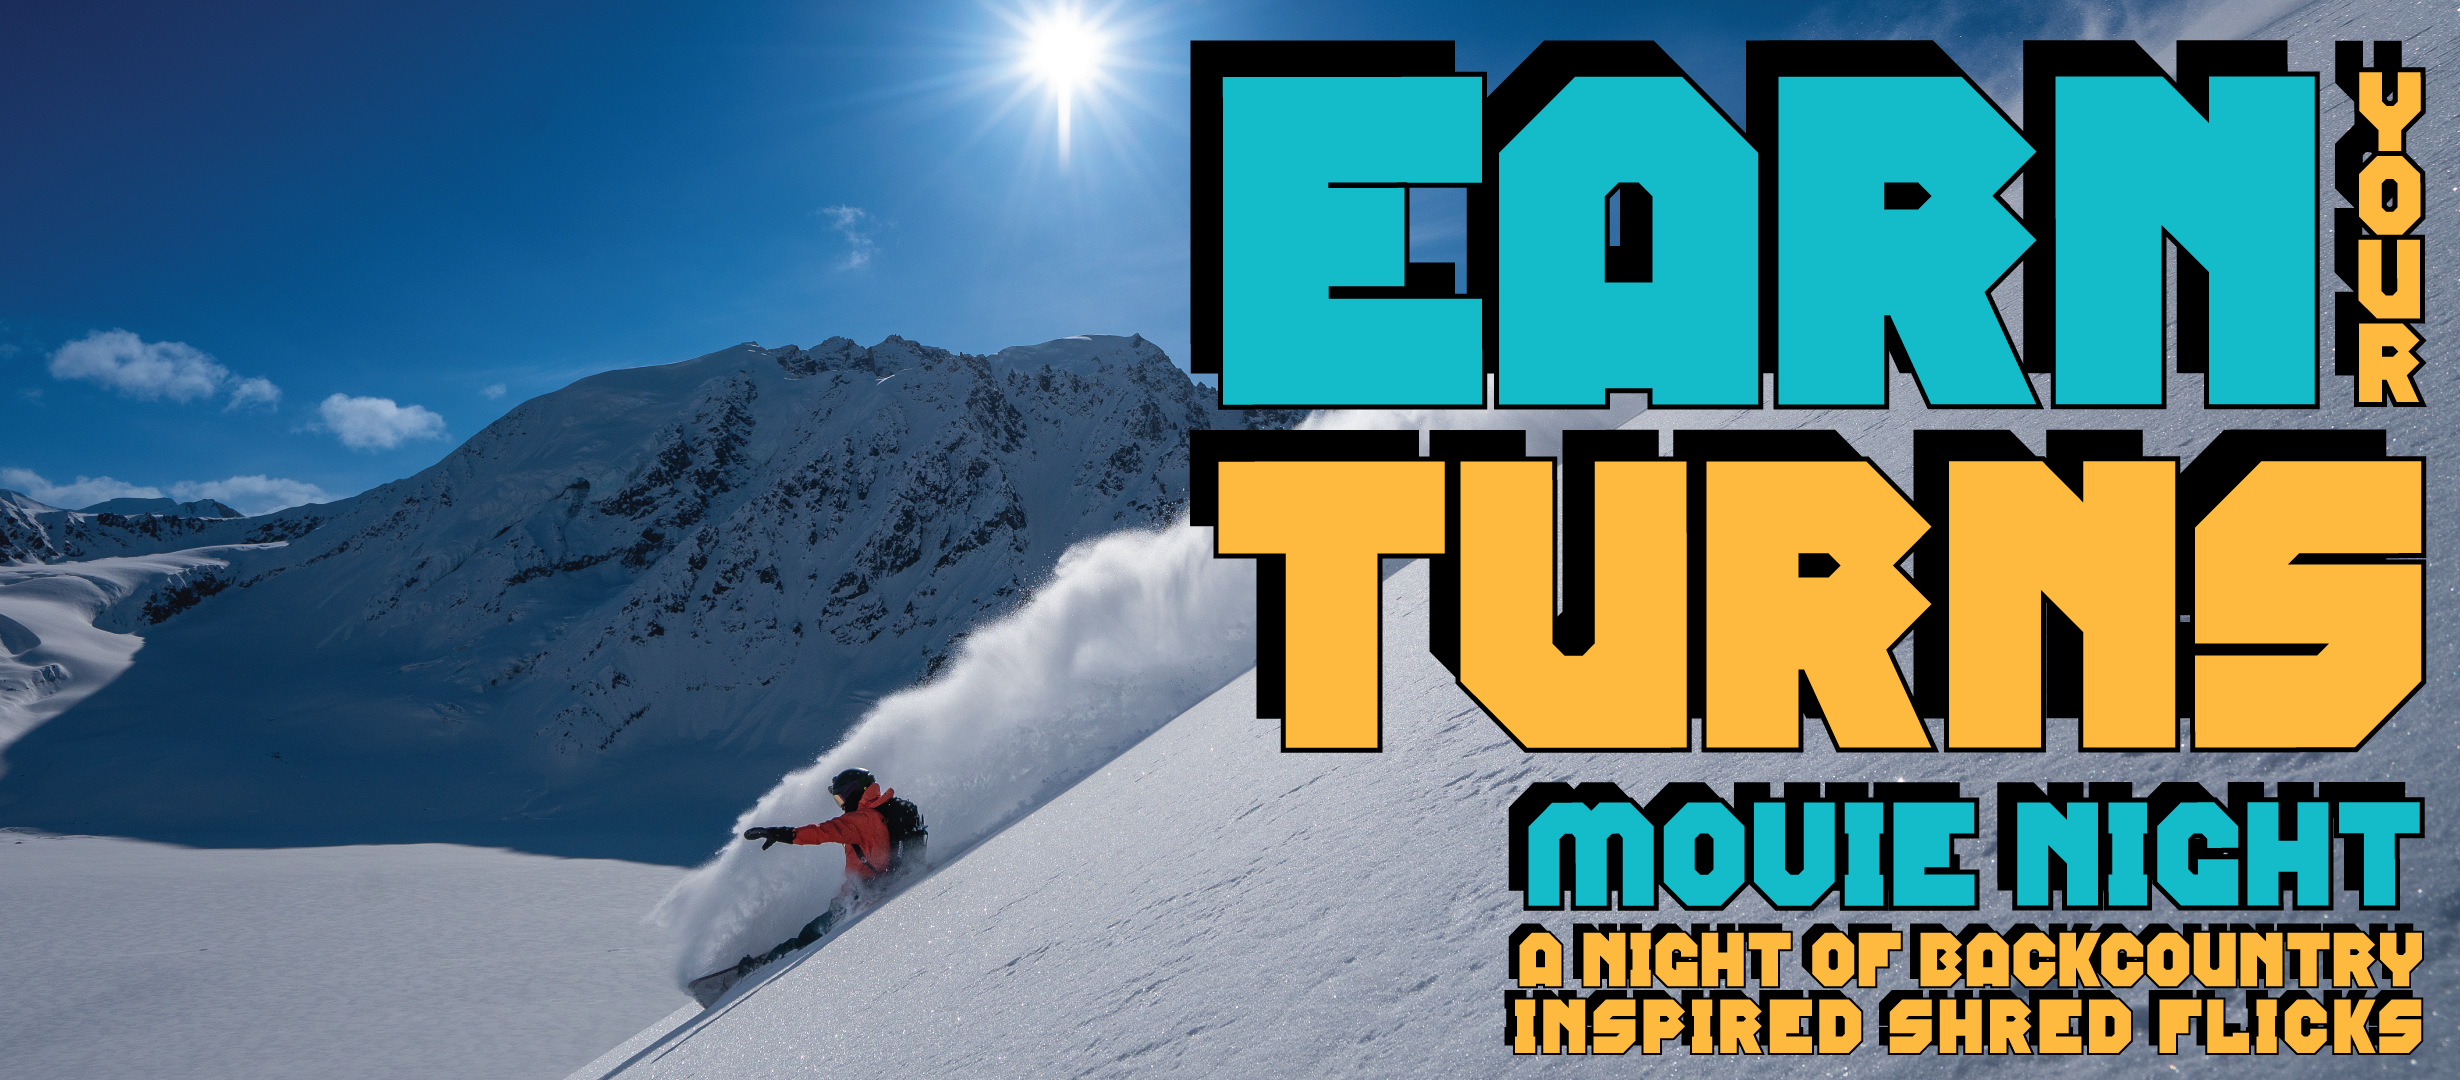 Earn your turns movie night